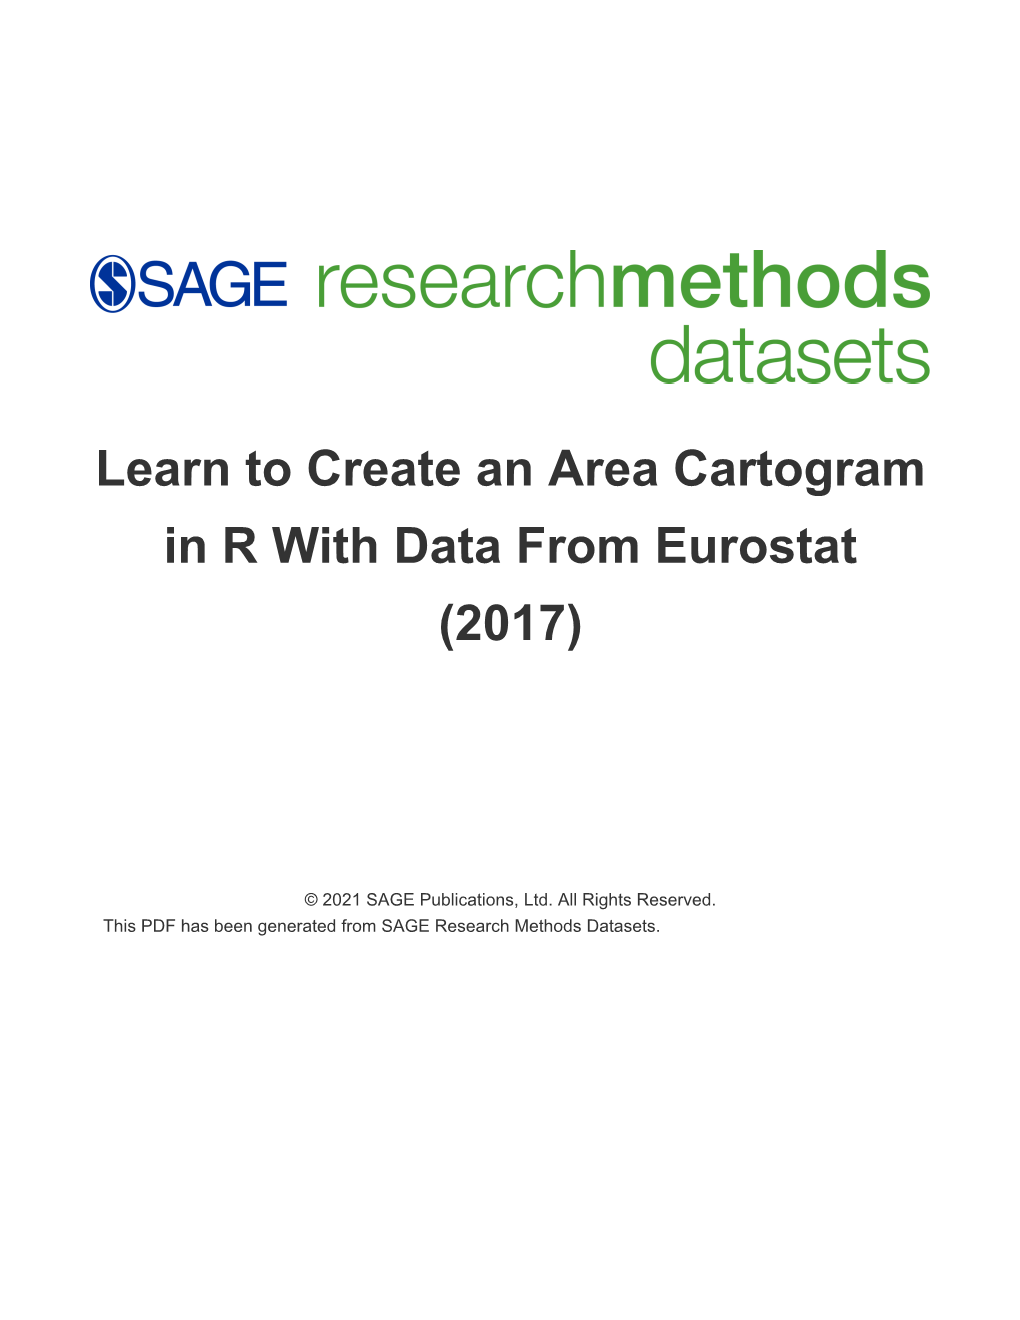 Learn to Create an Area Cartogram in R with Data from Eurostat (2017)